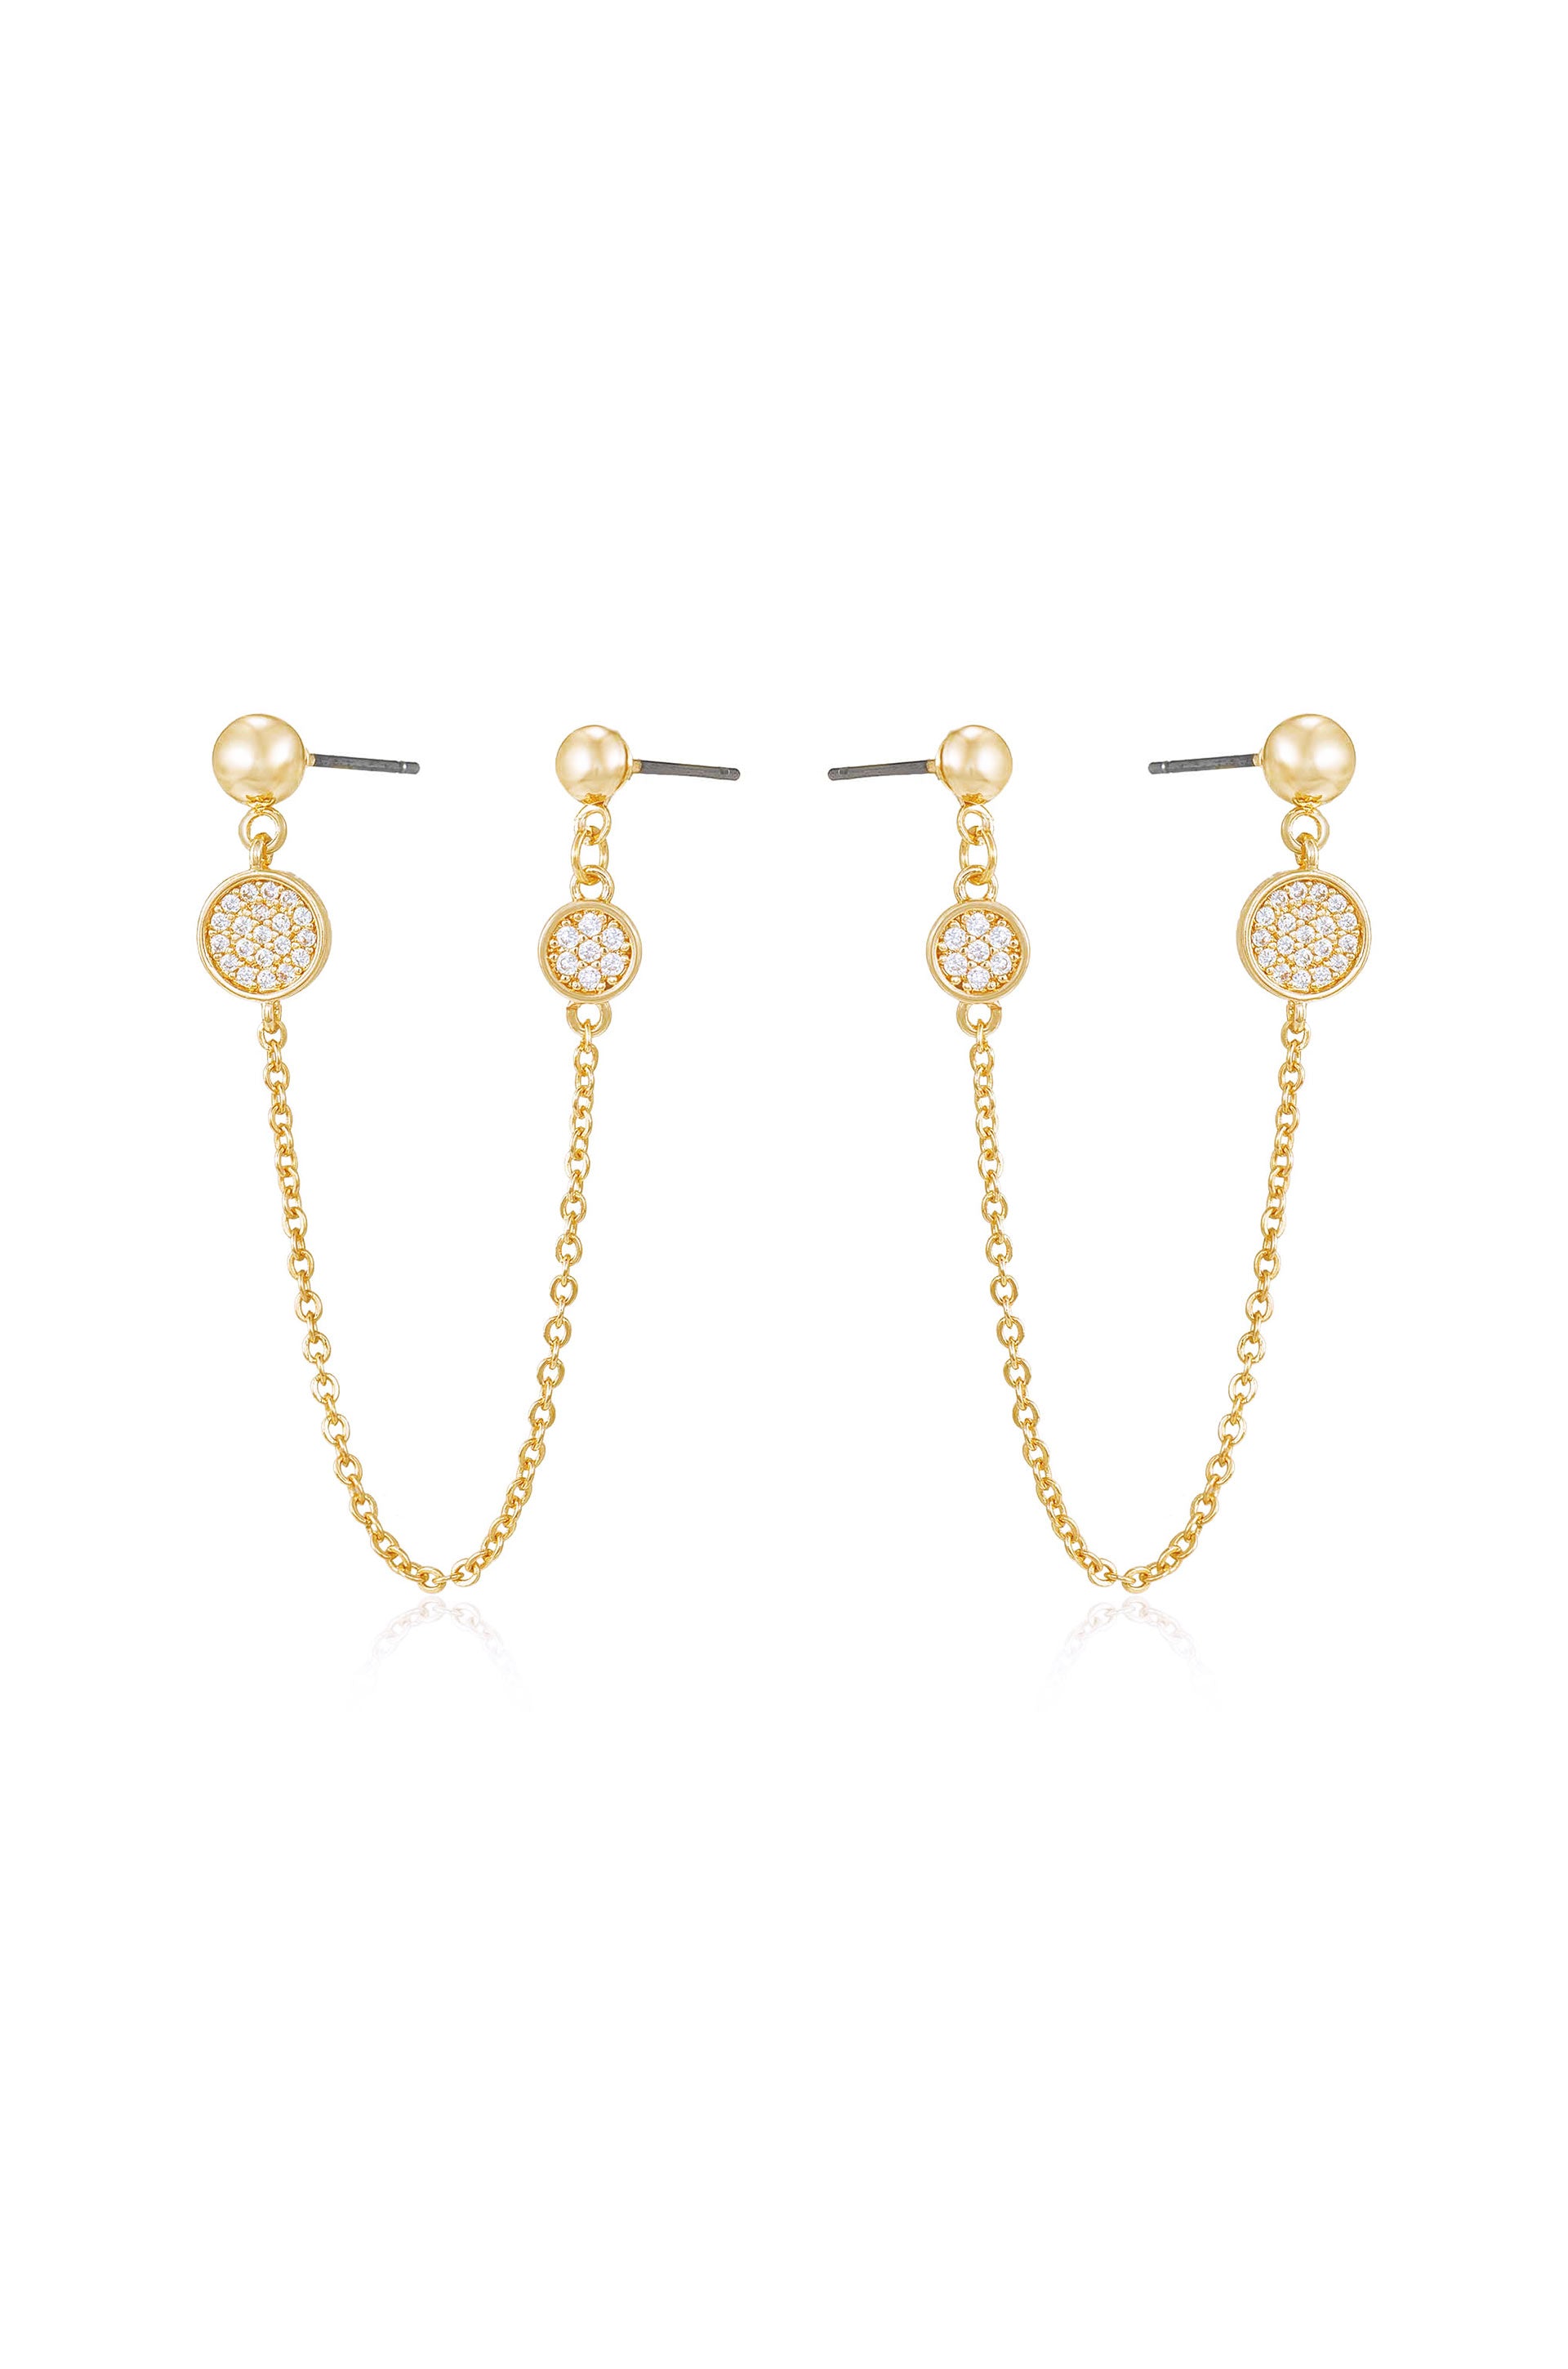 Classy And Beautiful Gold Long Chain Earrings Collection For Ladies -  YouTube